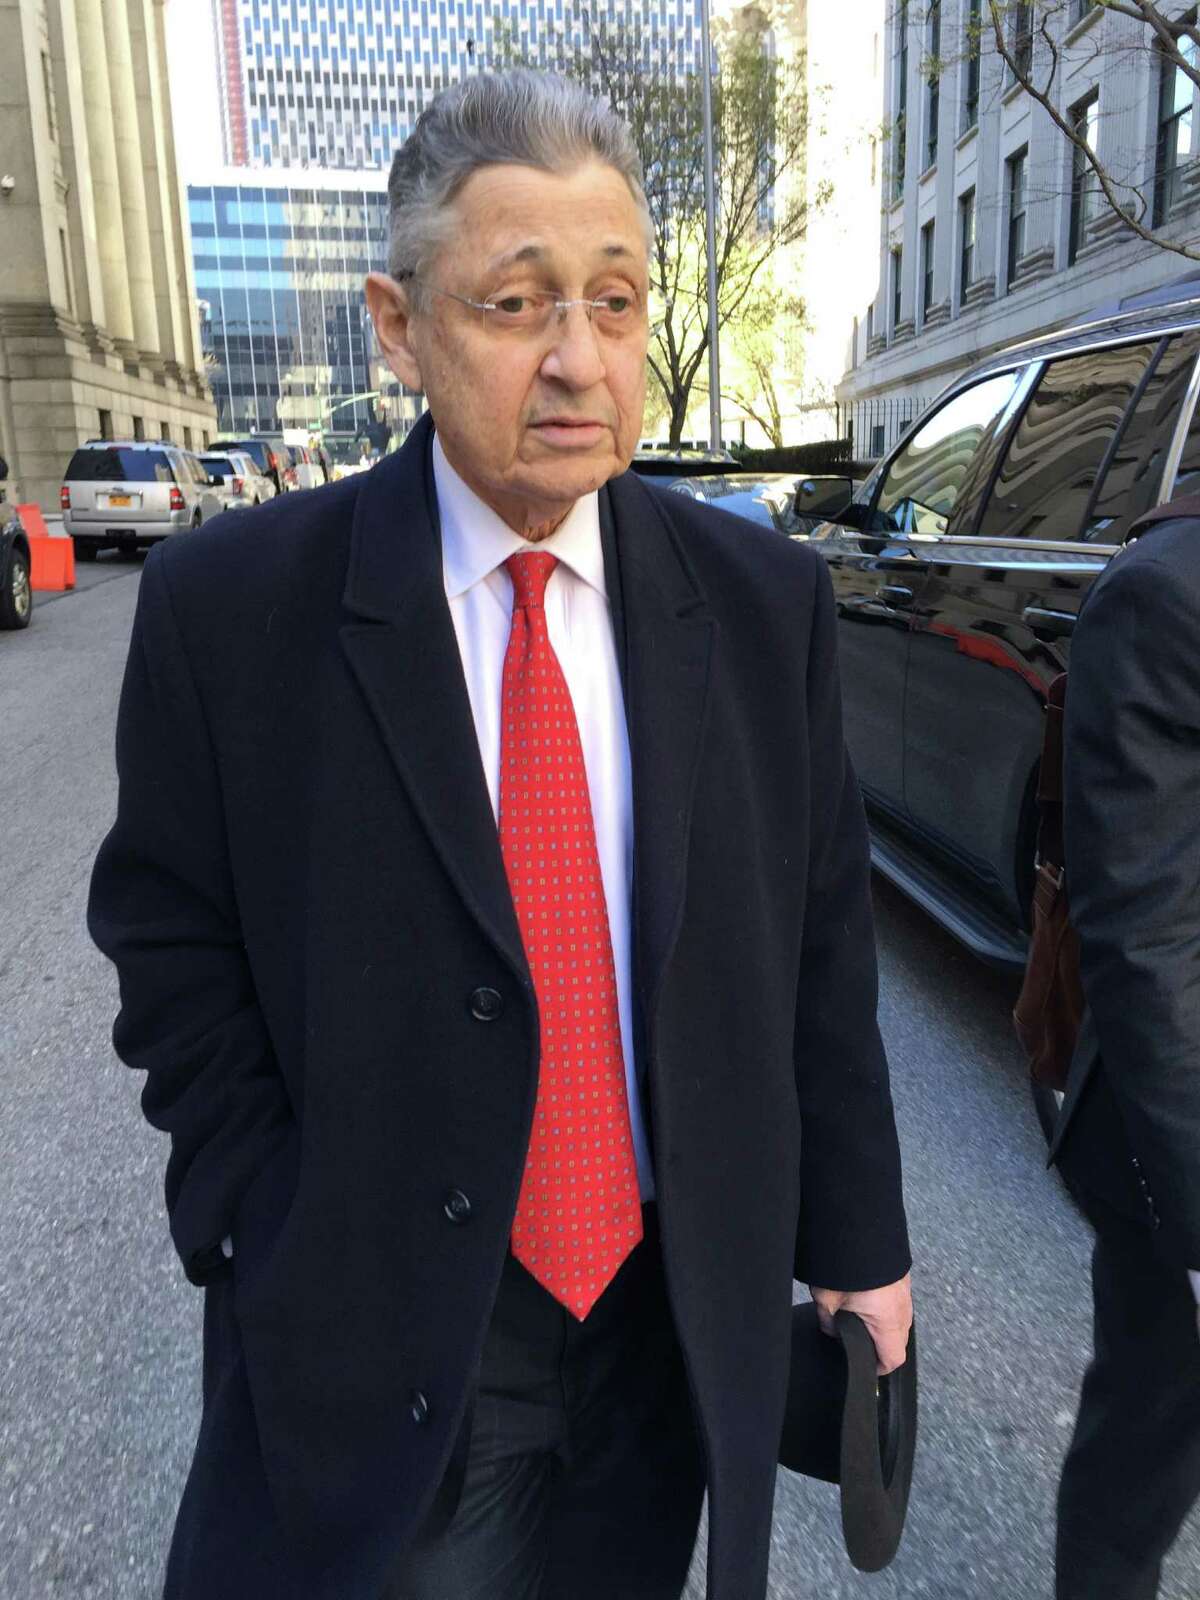 In this April 14, 2016 photo, former New York Assembly Speaker Sheldon Silver leaves court in New York. A judge says she plans to release information on Friday, April 15, that puts another blemish on the former Assembly Speaker's record in office. The 72-year-old Democrat was convicted in November in a $5 million corruption case. (AP Photo/Larry Neumeister)